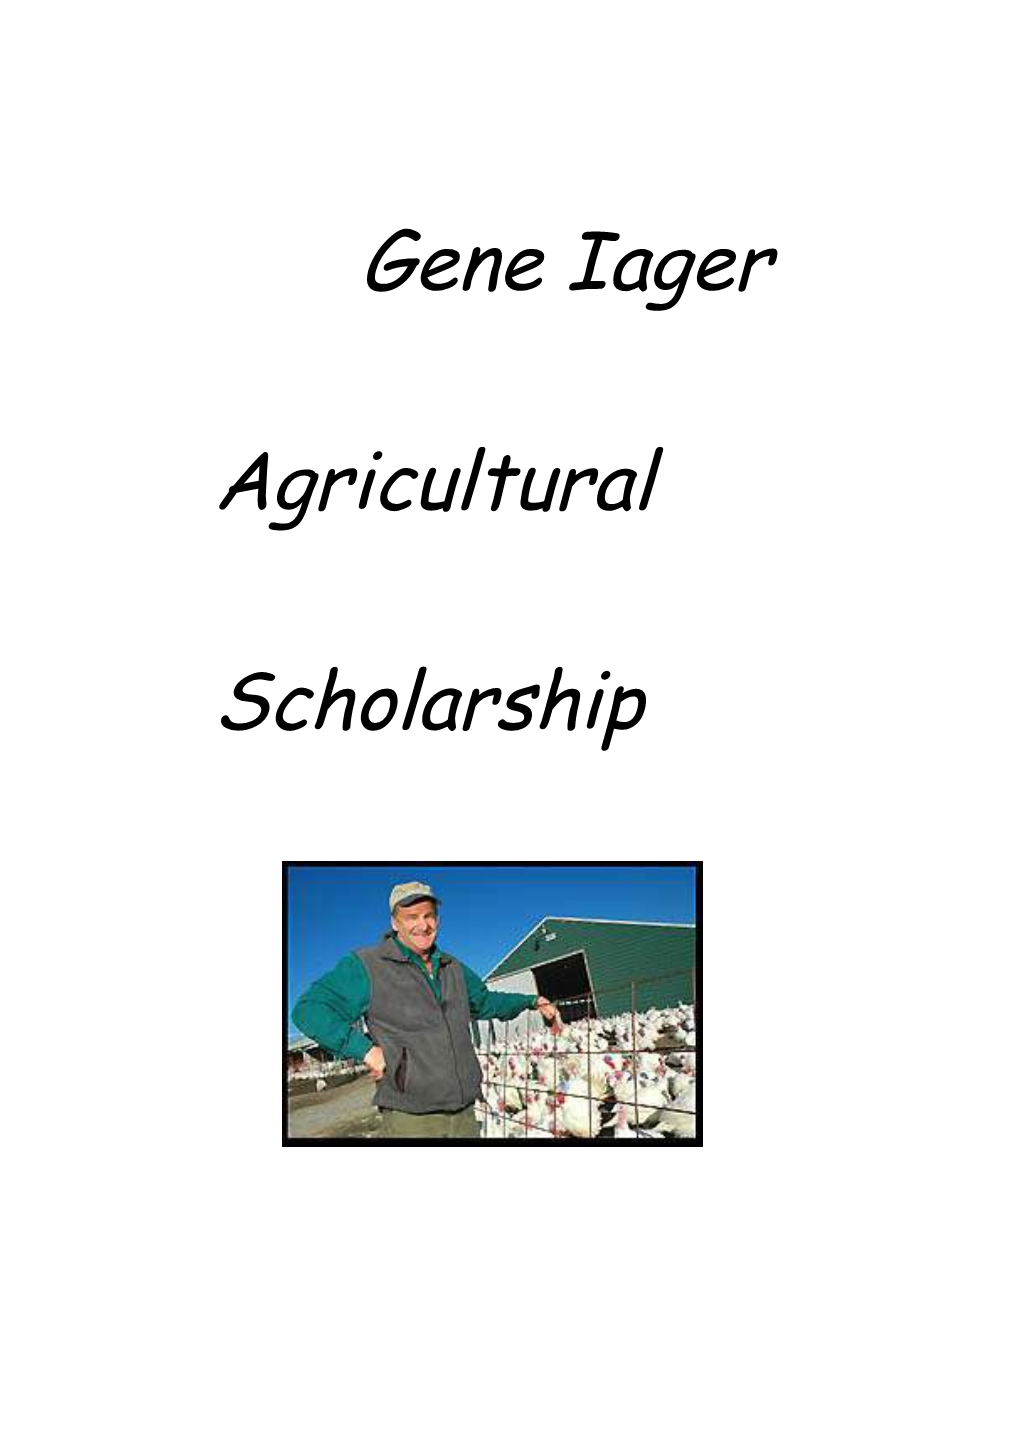 Gene Iager Agricultural Scholarship